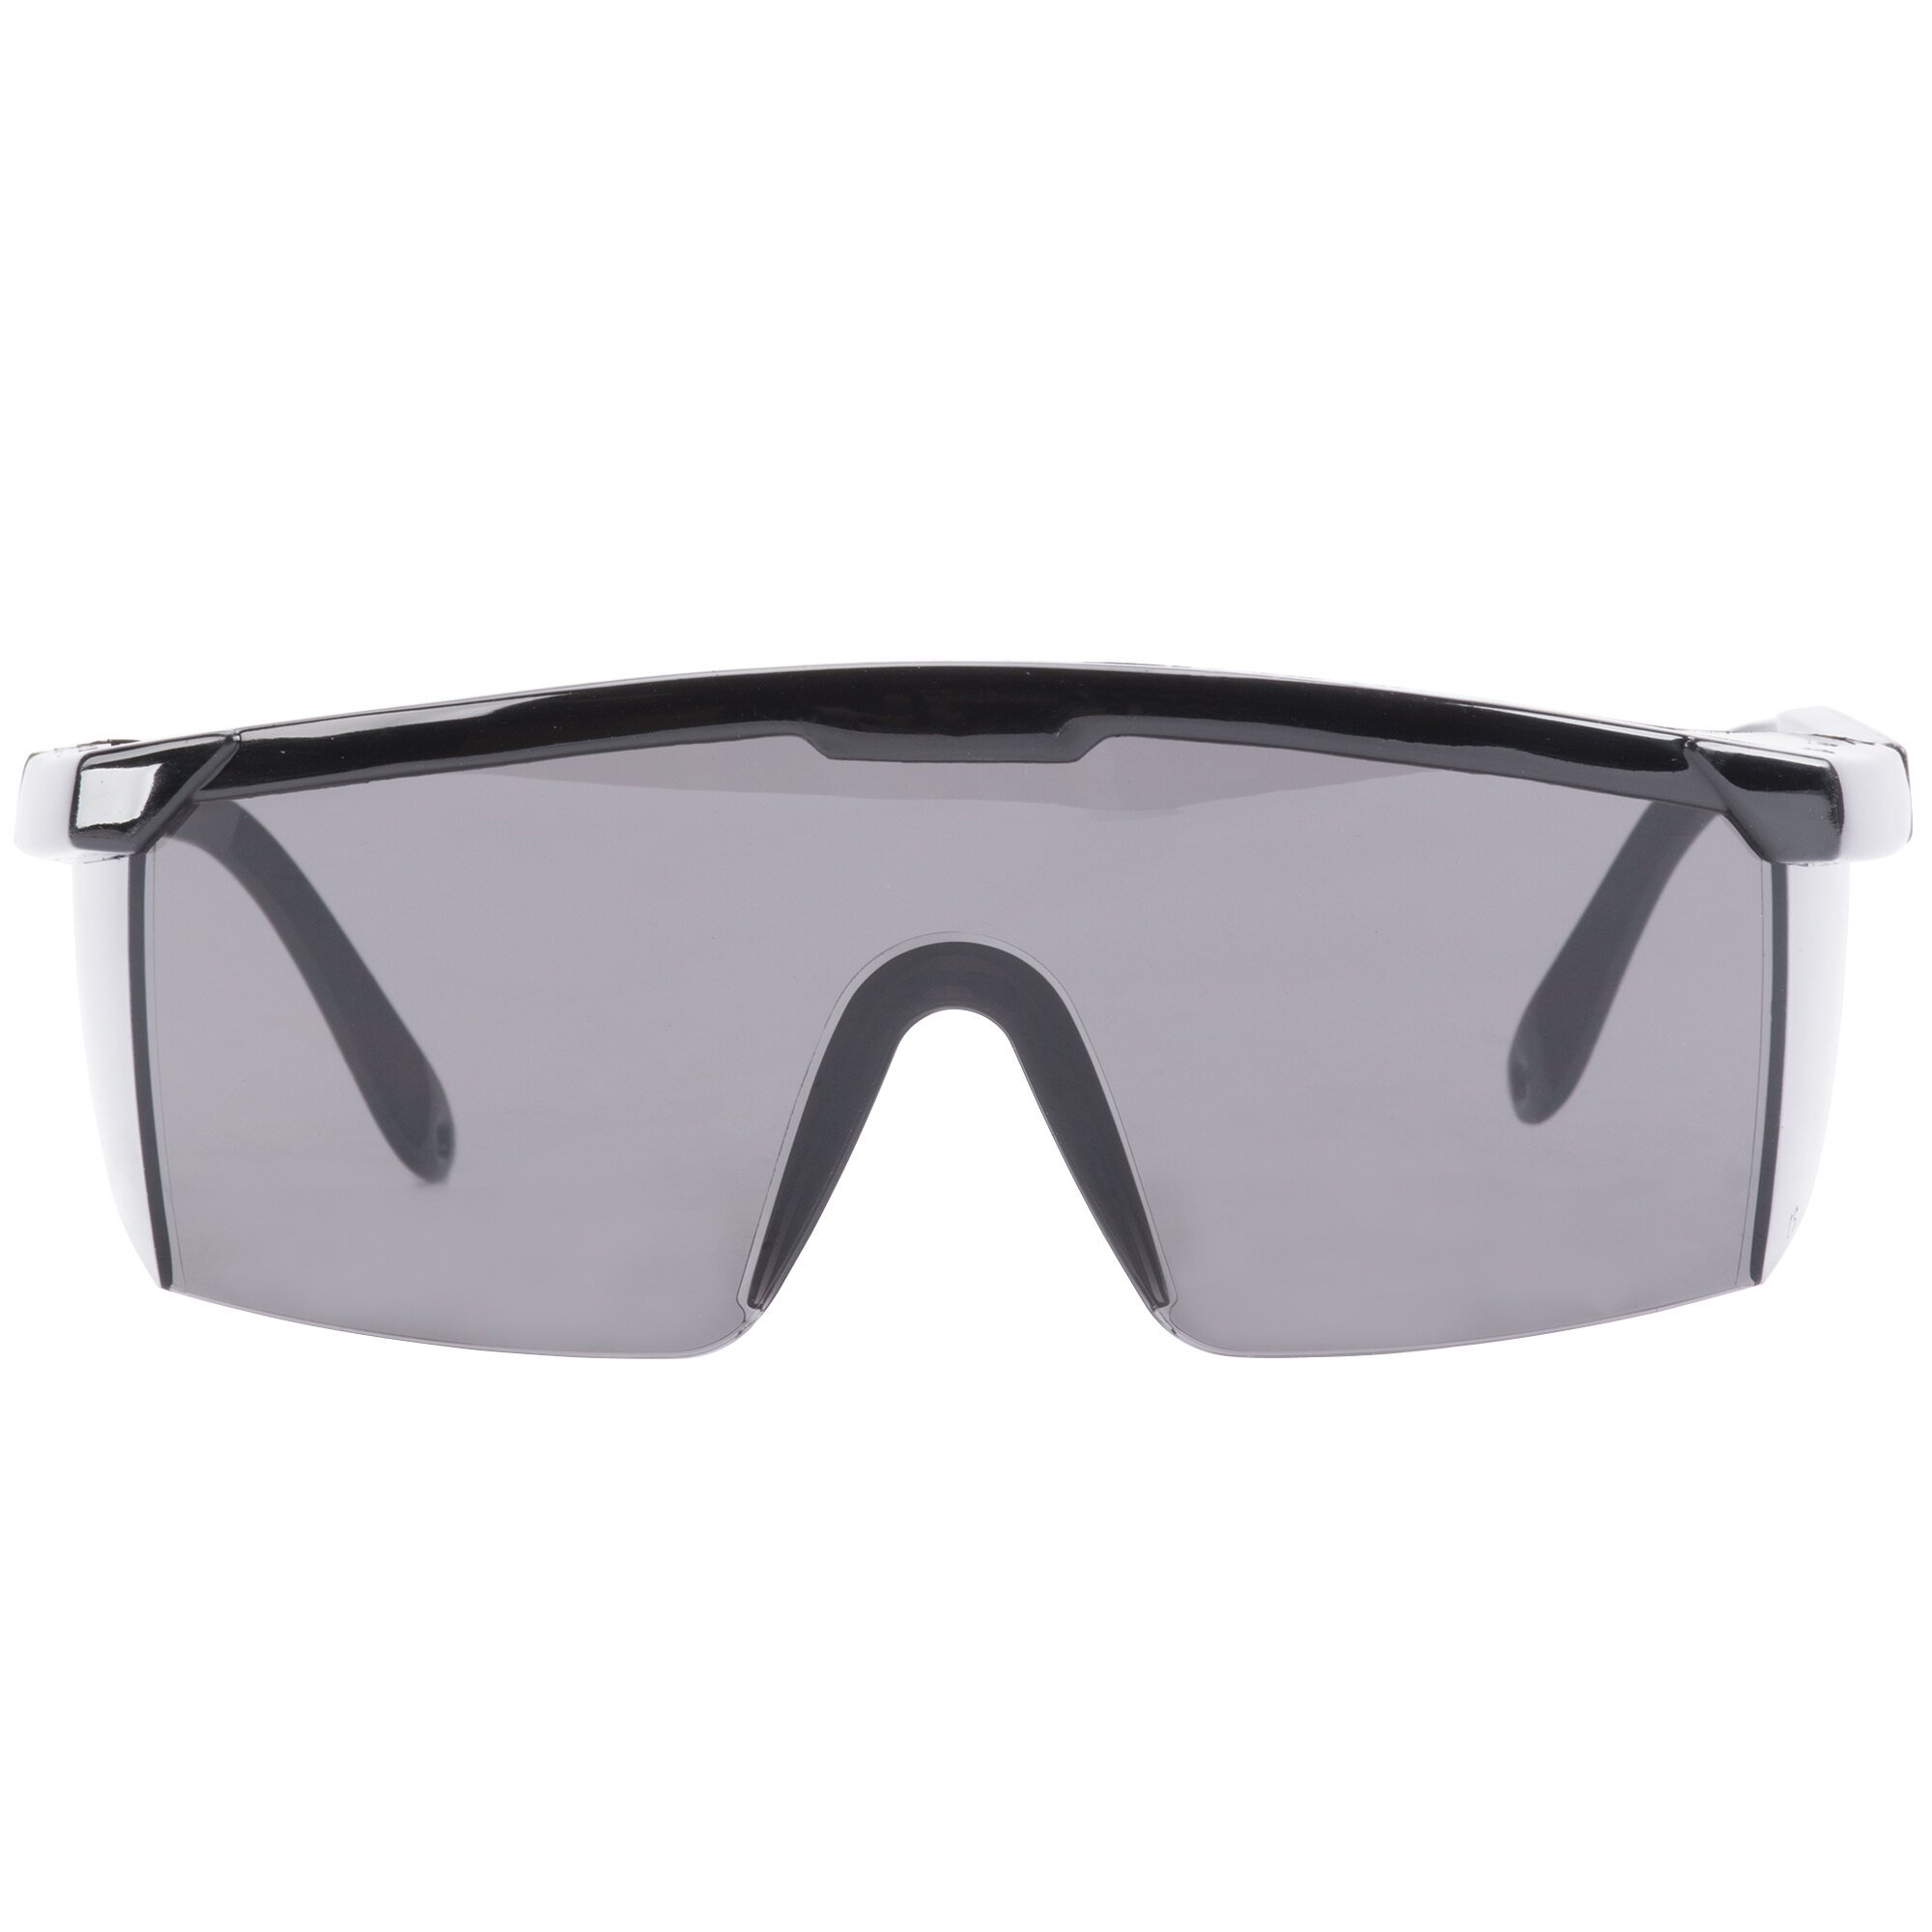 Scratch Resistant Safety Glasses / Eye Protection - Black with Gray Lens